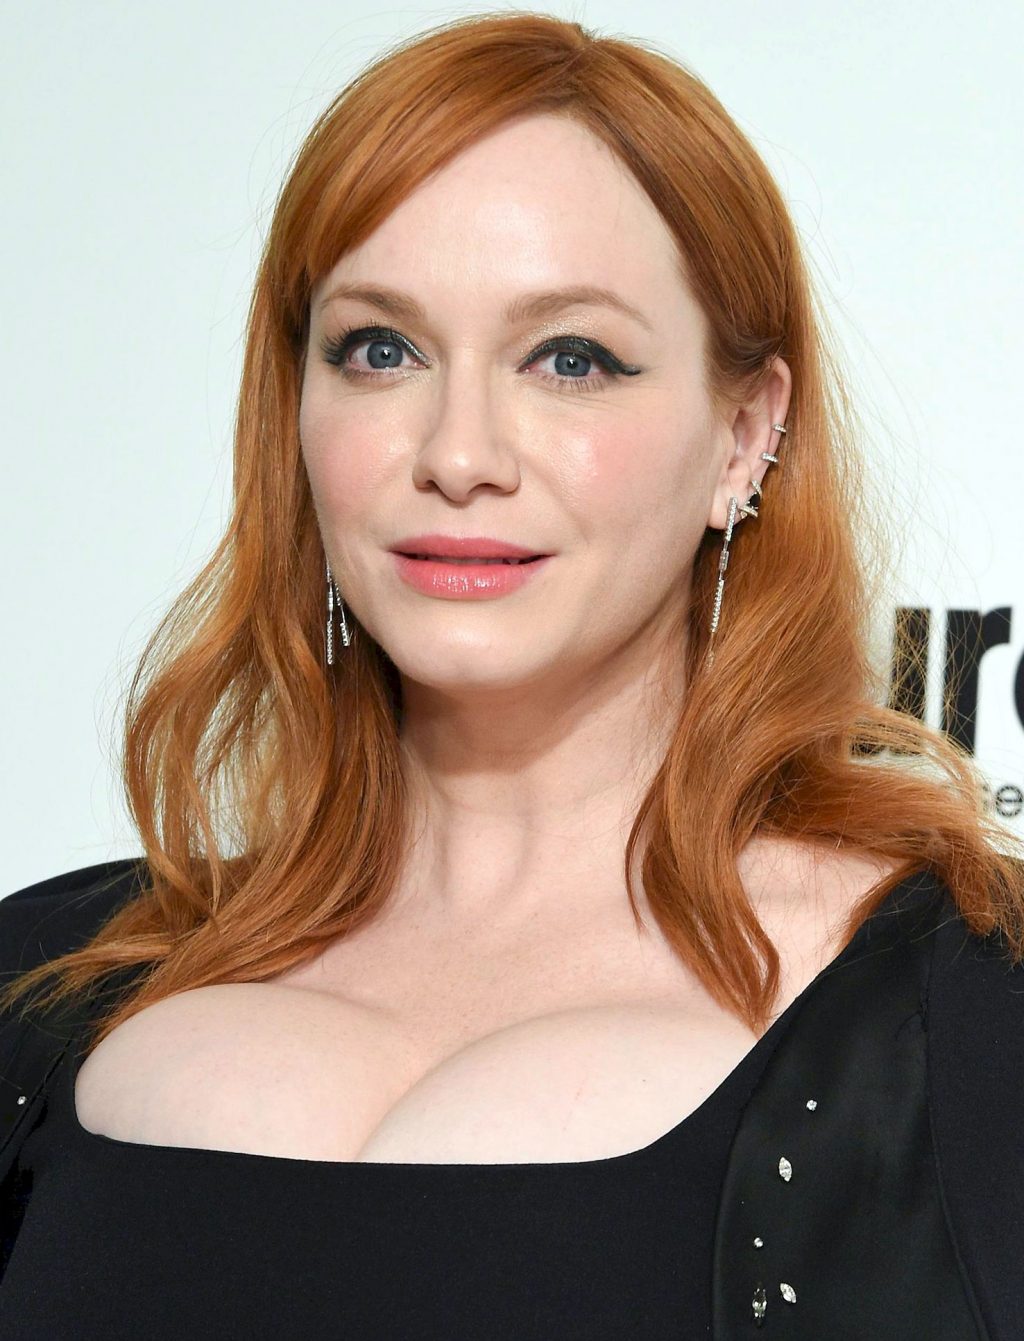 Christina Hendricks nude naked sexy topless hot cleavage14 1024x1341 optimized